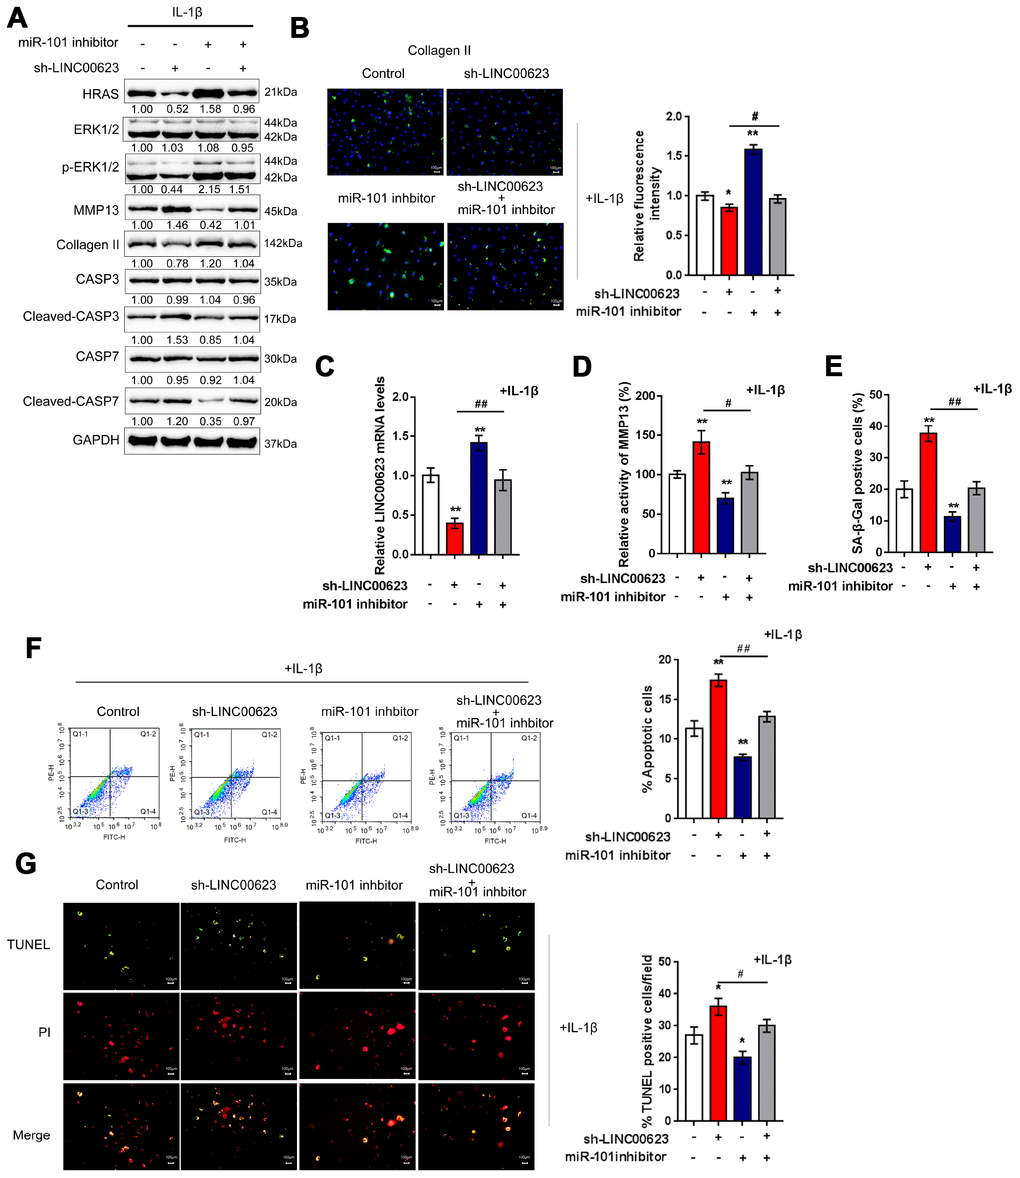 LINC00623/miR-101/HRAS axis modulates the apoptosis, senescence and ECM degradation in OA chondrocytes through MAPK signaling pathway. Chondrocytes were co-transfected with miR-101 inhibitor and sh-LINC00623 and expose to IL-1β stimulation; the protein levels of HRAS, ERK, p-ERK, MMP13, Collagen II, Caspase 3, cleaved-Caspase 3, Caspase 7 and cleaved-Caspase 7 were examined using immunoblotting (A); the localization of Collagen II was examined using IF (B); the expression levels of LINC00623 was determined by real-time PCR (C); the activity of MMP-13 was determined by a SensoLytes Plus 520 MMP13 assay kit (D); the SA-β-Gal positive cells were determined by the SA-β-Gal staining (E); the cell apoptosis was examined using flow cytometry (F) and TUNEL (G). The data are presented as mean ± SD of three independent experiments. *PPPP